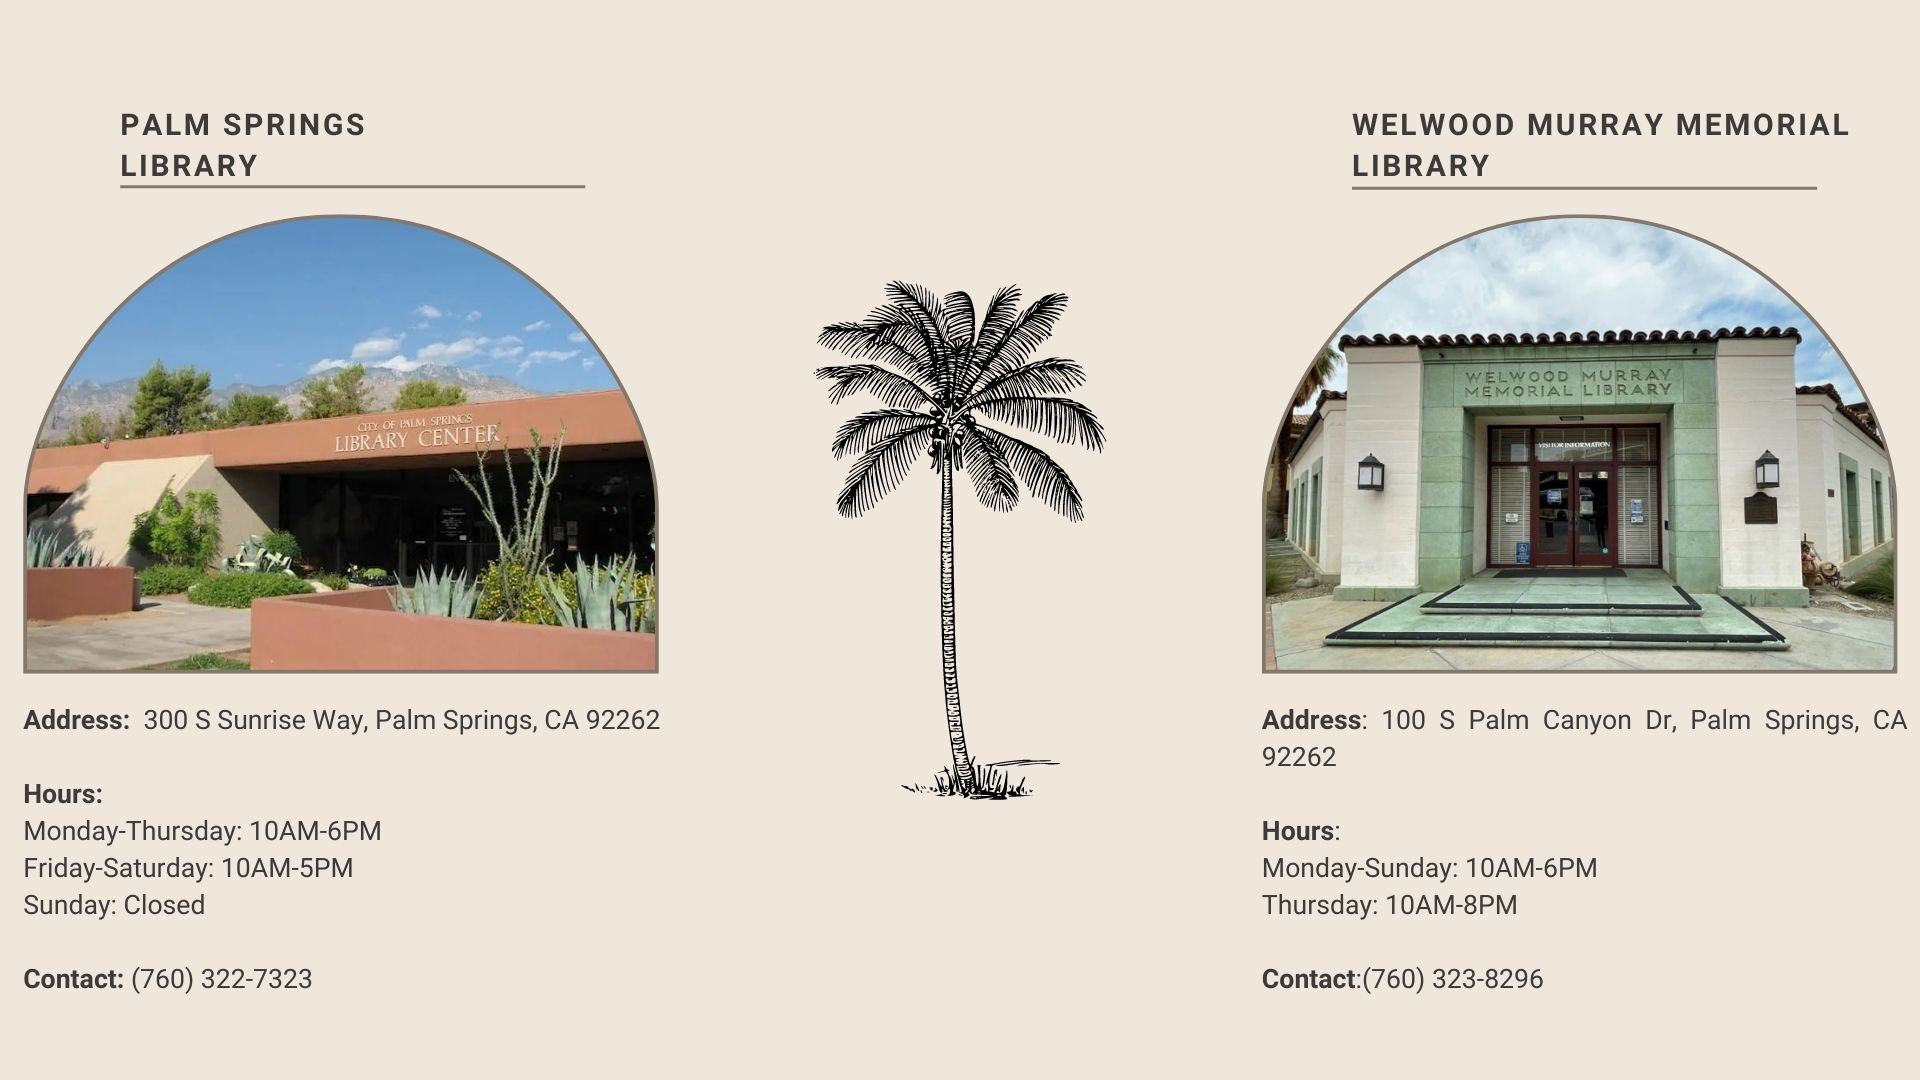 https://smile.amazon.com/gp/chpf/homepage/ref=smi_chpf_redirectImage of the palm springs library. Palm Springs Library. Address: 300 South sunrise way Palm springs California. Hours Monday to Thursday 10 a m to 6 p m. Friday to Saturday 10 a m to 5 p m. Sunday Closed. Contact number 7603227323. Image of Welwood murray memorial library. Welwood murray memorial library.  address 100 south palm canyon drive palm springs California 92262. Hours Monday to Sunday 10 a m to 6 p m. Thursday 10 a m to 8 p m. Contact number 7603238296